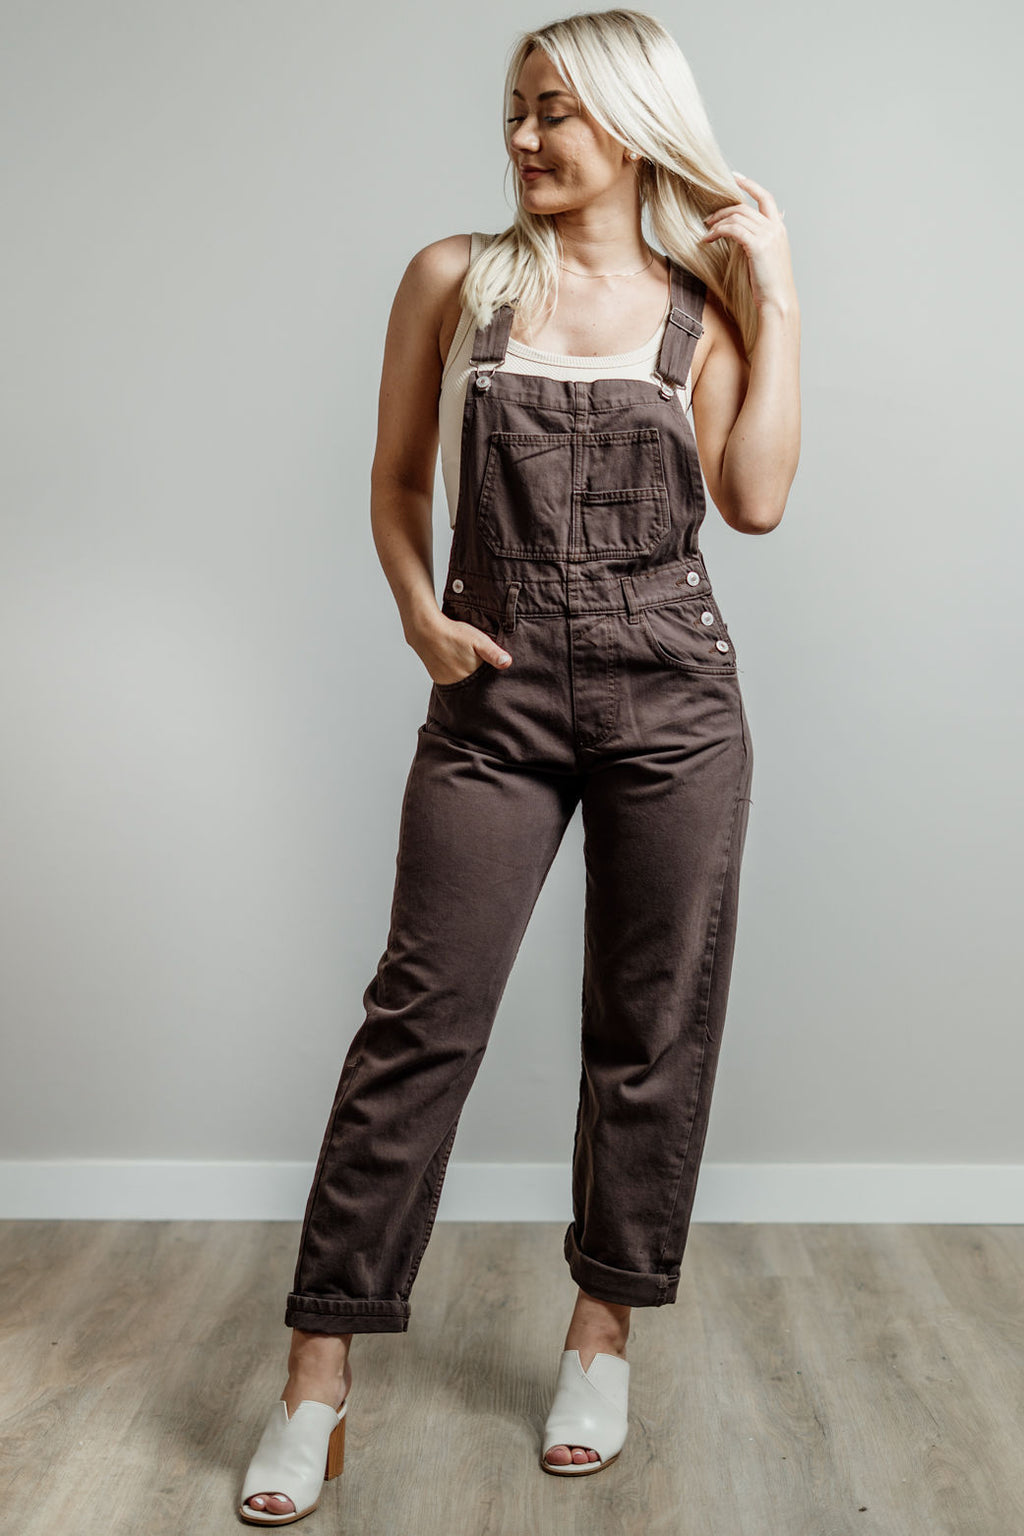 My Favorite Purchase of the Summer - Soft Overalls - Straight A Style